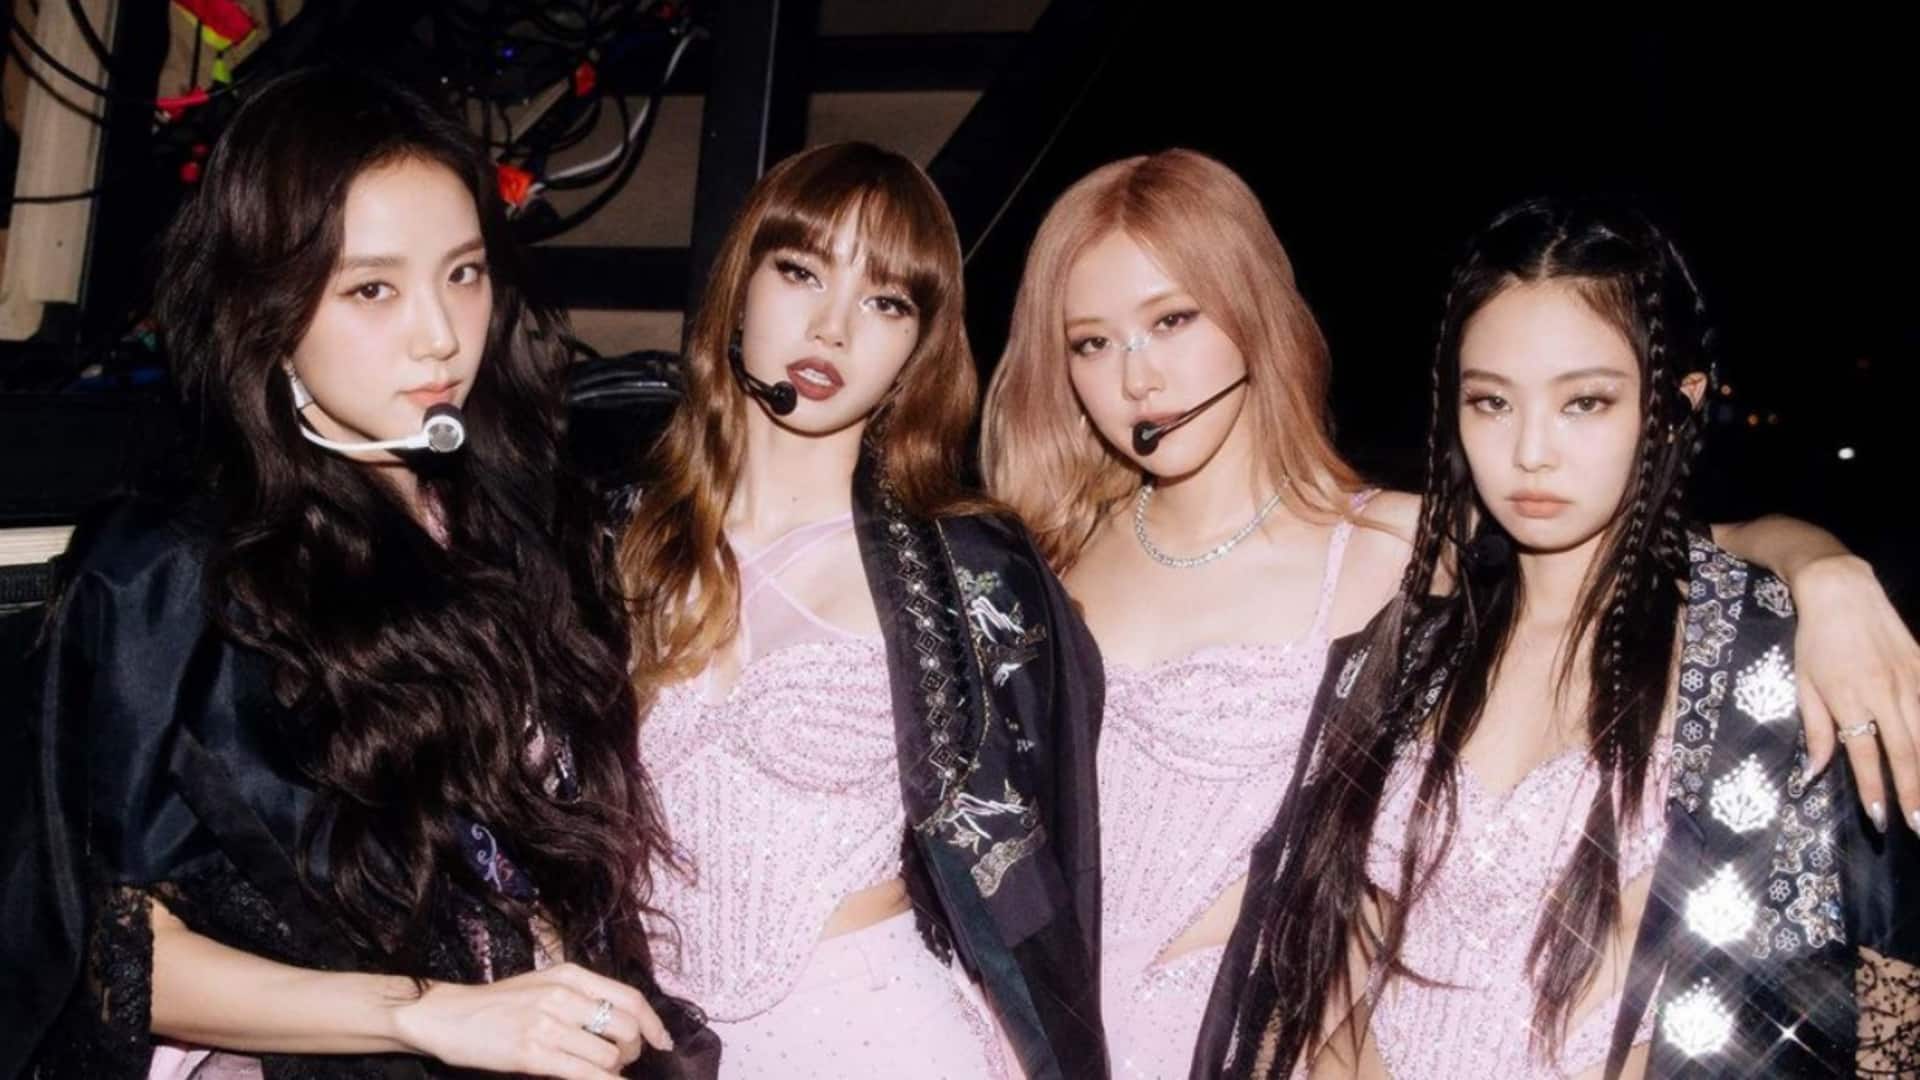 BLACKPINK Girl Group Interview, Songs and Music Albums - HELLO! India